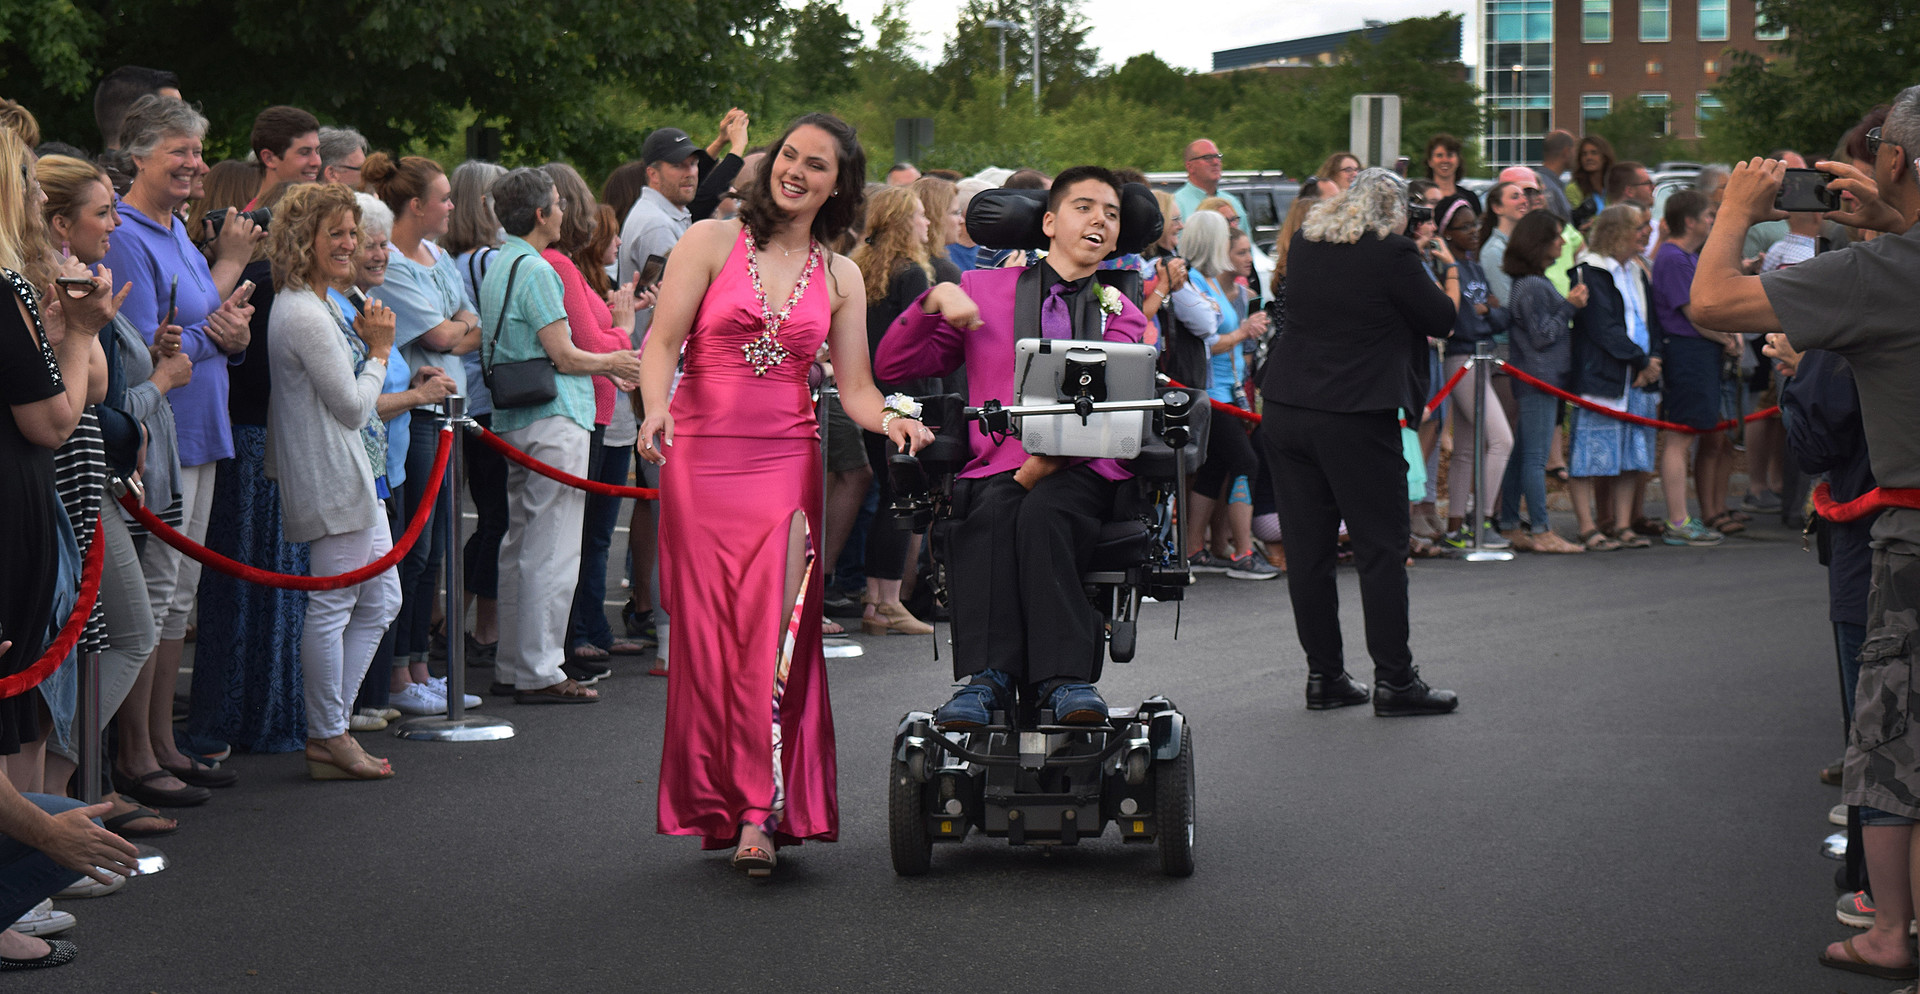 Wide film still of a smiling young couple dressed for prom, an ambulatory girl wearing a long pink dress, and a boy in a wheelchair wearing a purple tux. A large, cheerful crowd of people looks on from behind a red velvet rope barrier.